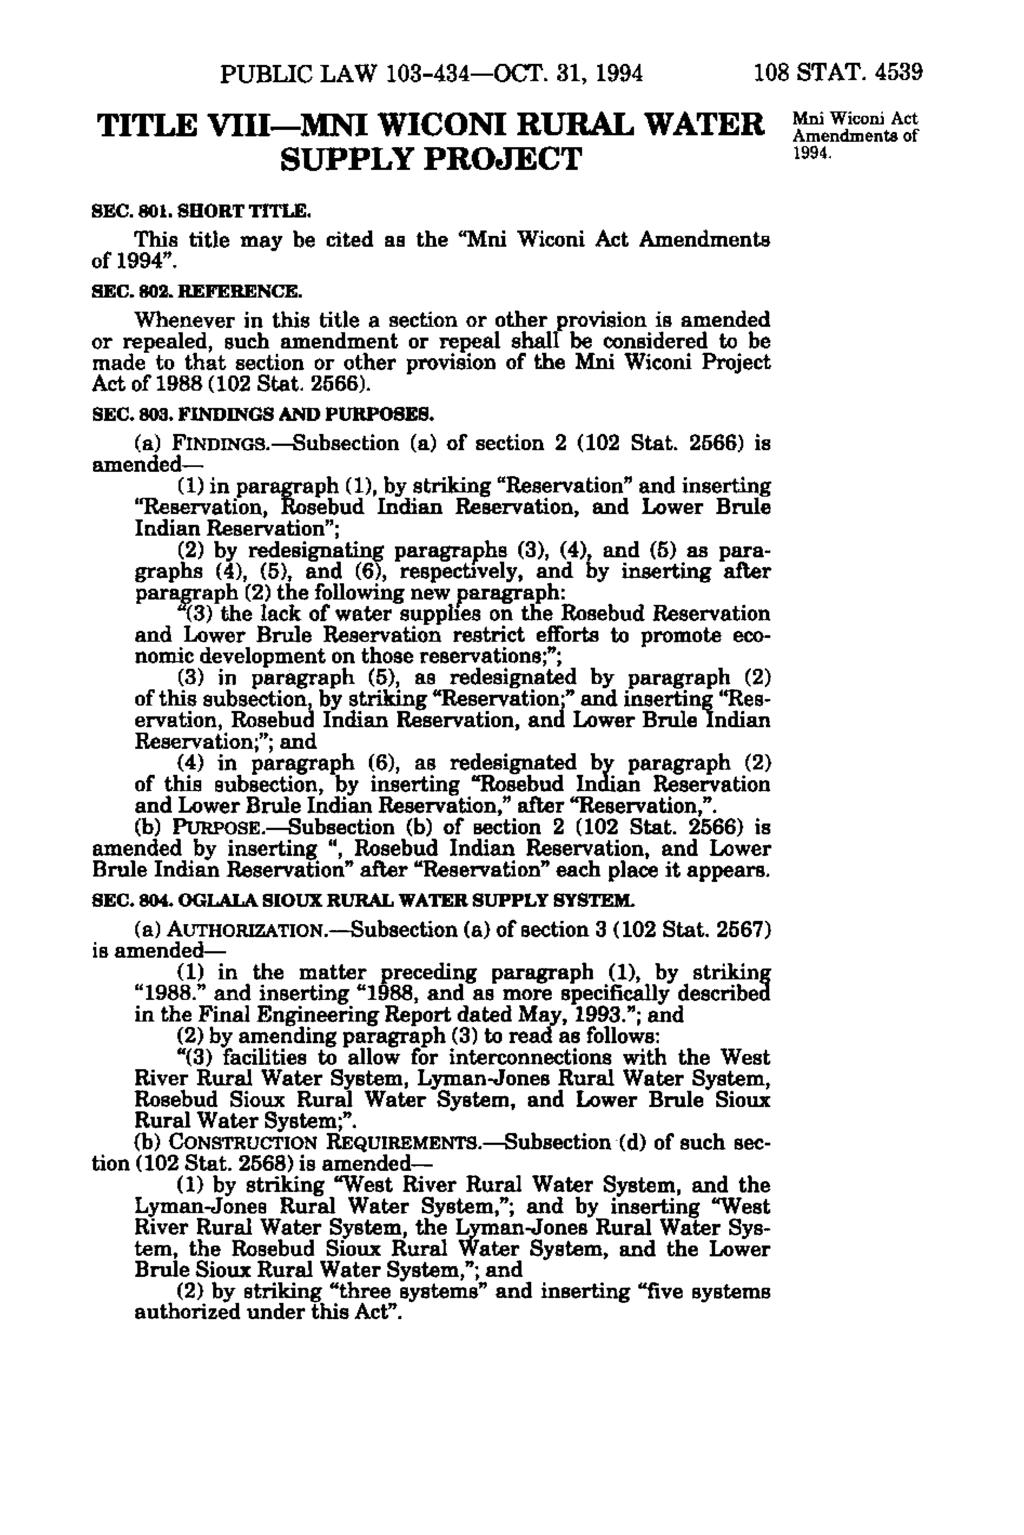 PUBLIC LAW 103-434 OCT. 81, 1994 108 STAT. 4539 TITLE Vin MNI WICONI RURAL WATER SELS^ 1994. SUPPLY PROJECT SEC. 801. SHORT TITLE. This title may be cited as the "Mni Wiconi Act Amendments of 1994".